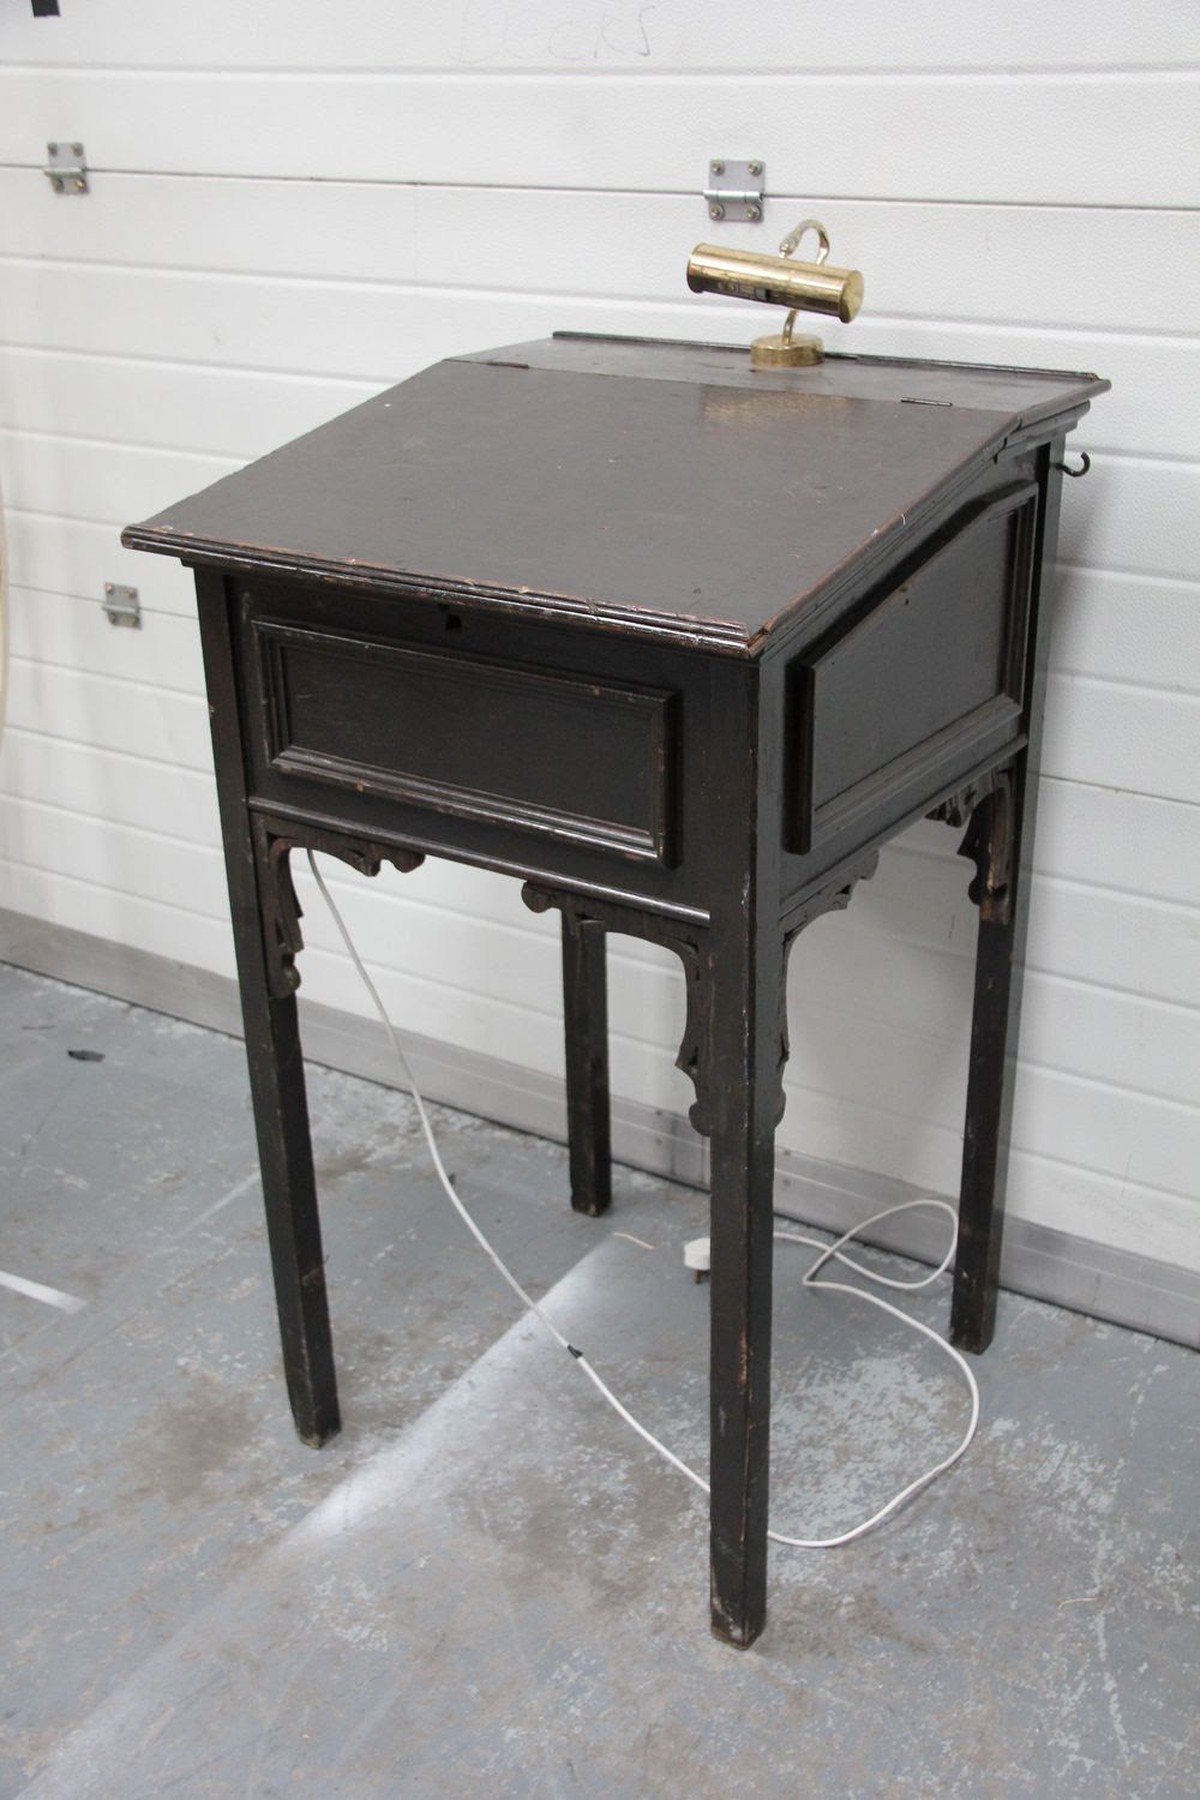 Secondhand Exhibition And Display Equipment Lecterns